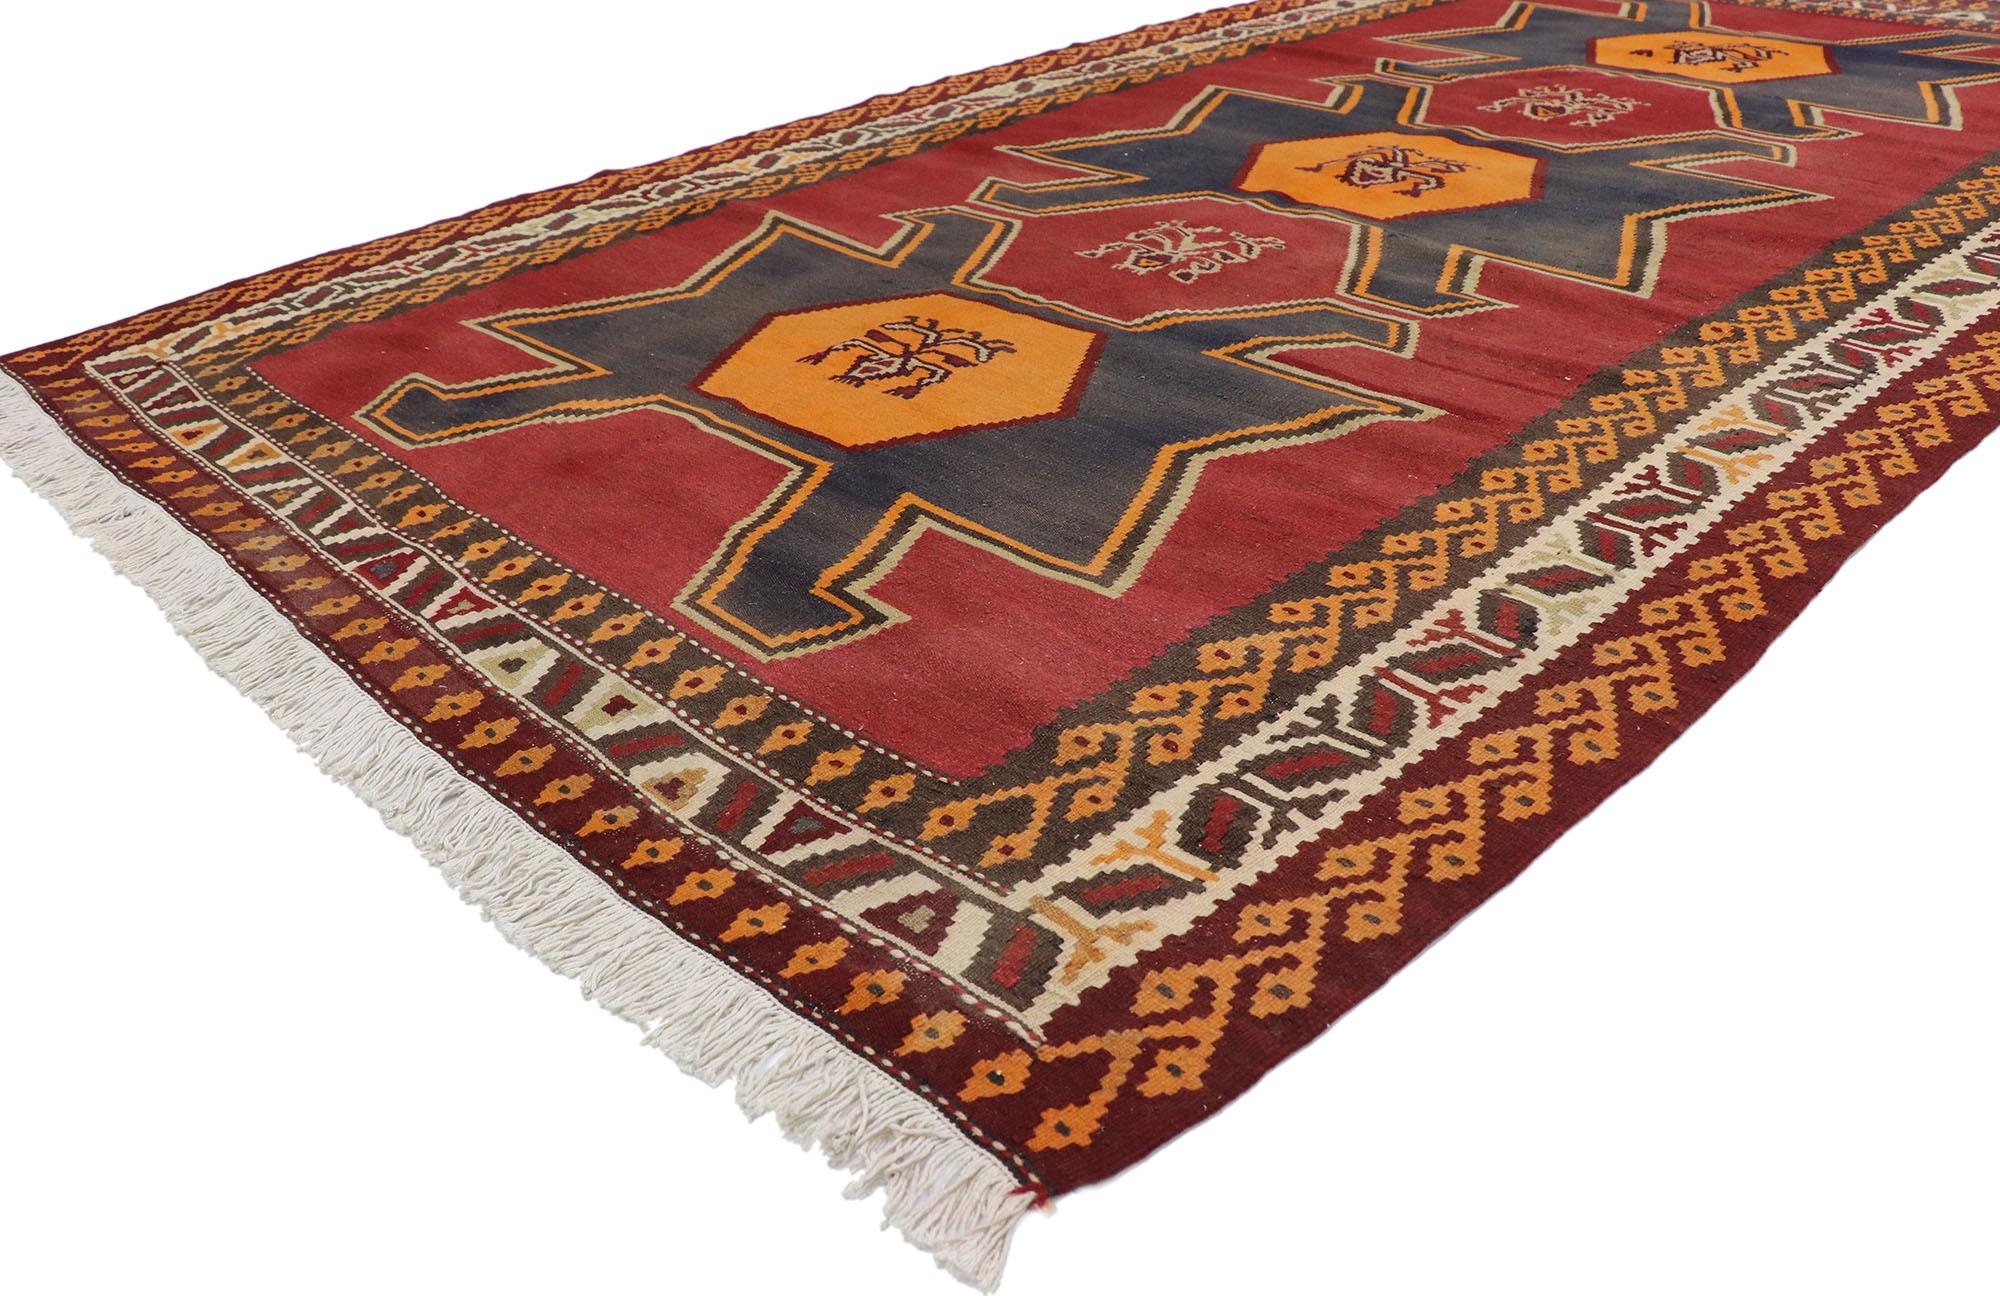 78036 Vintage Persian Shiraz Kilim rug with Tribal Style 05'06 x 09'08. Full of tiny details and a bold expressive design combined with vibrant colors and tribal style, this hand-woven wool vintage Persian Shiraz kilim rug is a captivating vision of